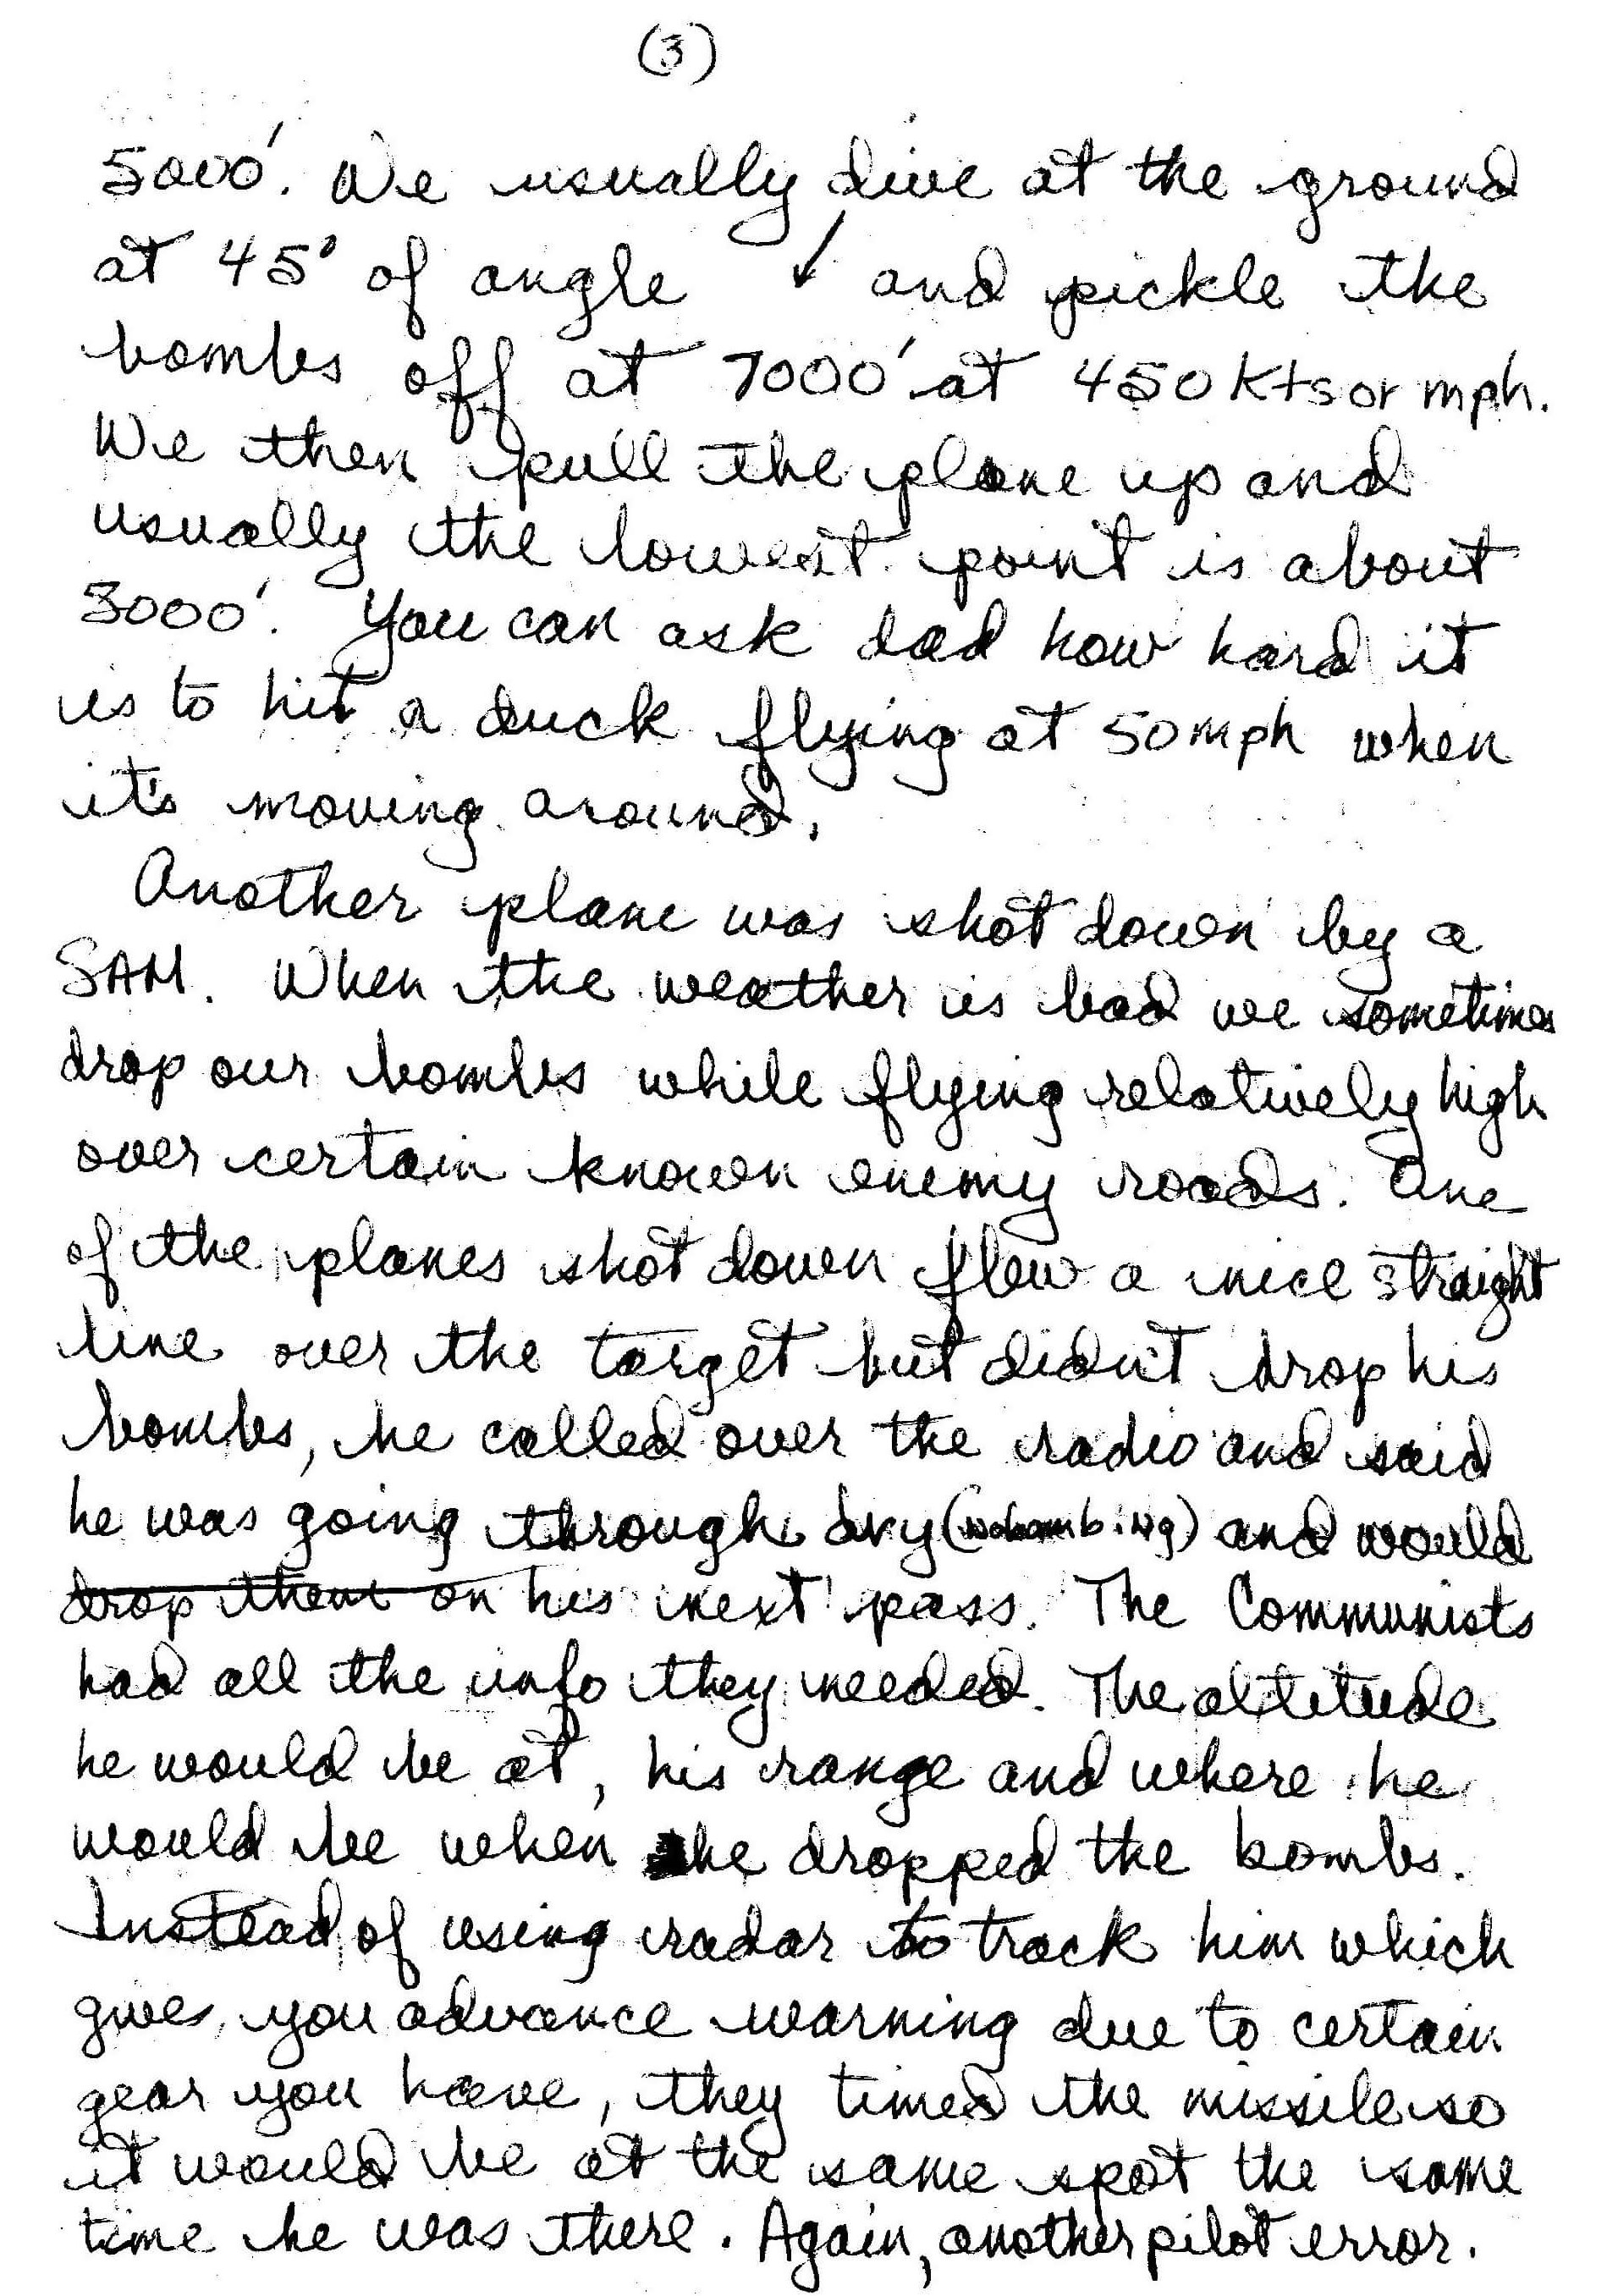 Page 3 of a letter home.